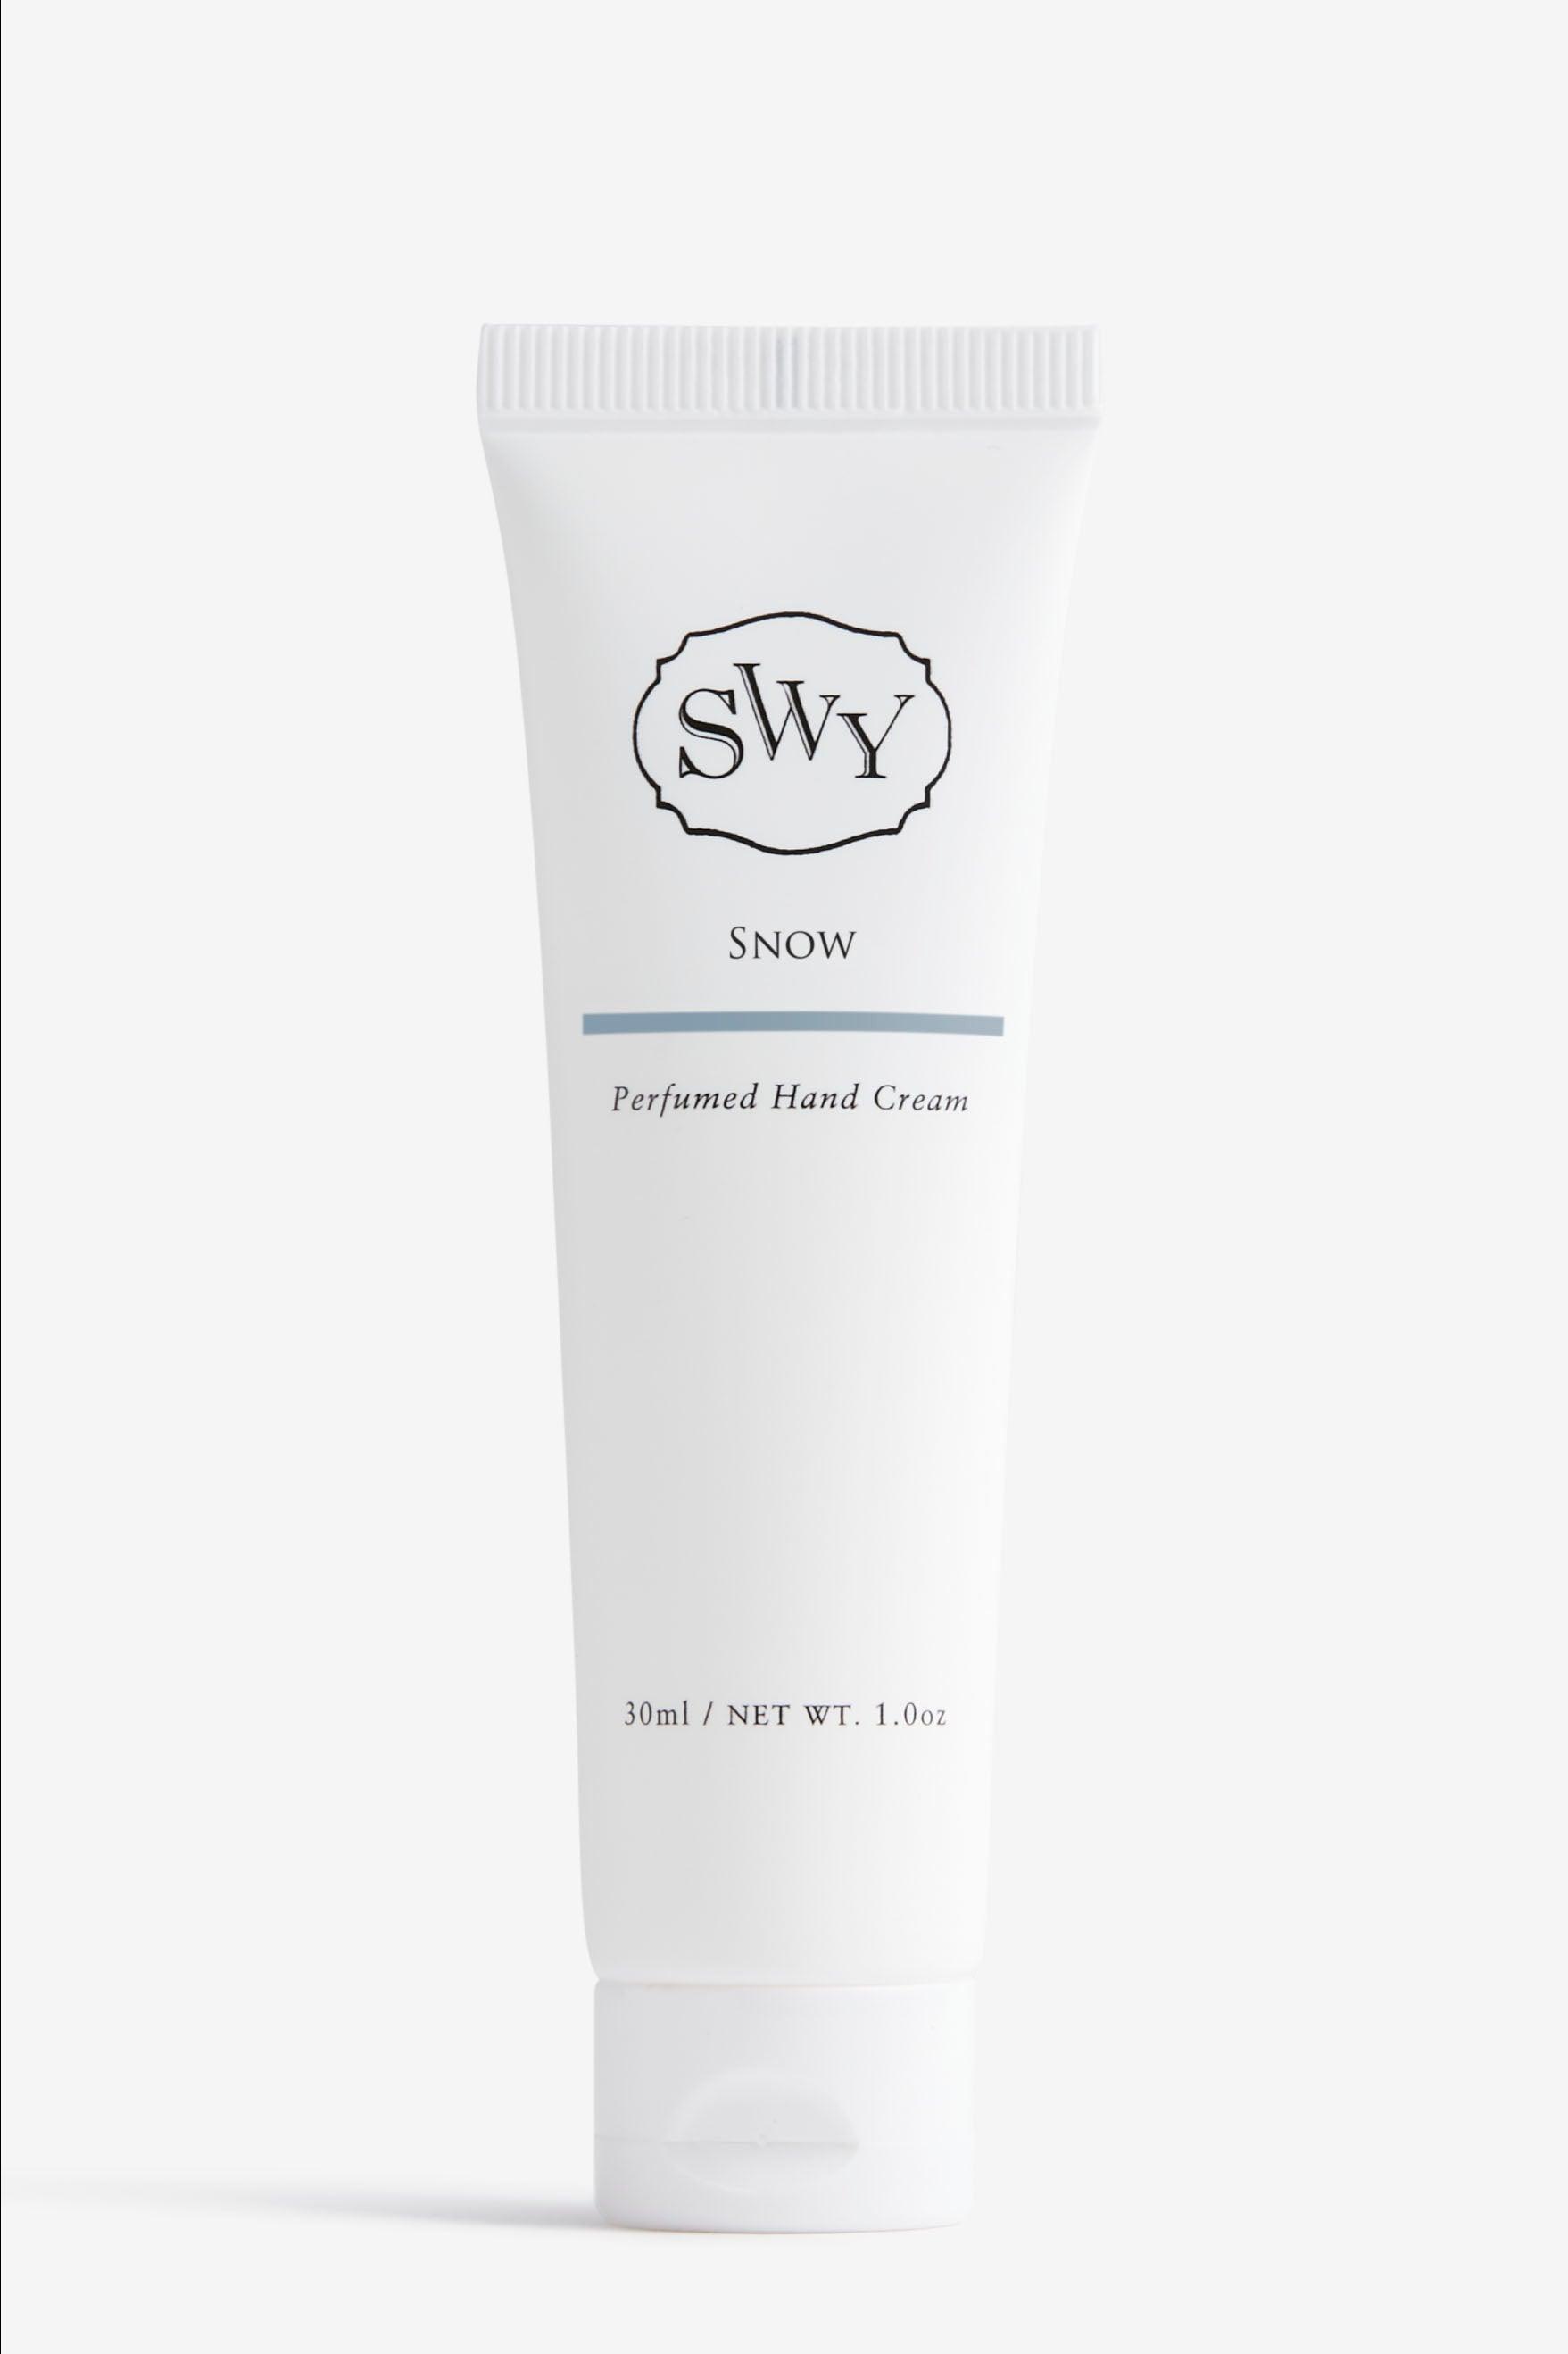 Hand Cream - pocket size - Snow - SWY - Scent With You